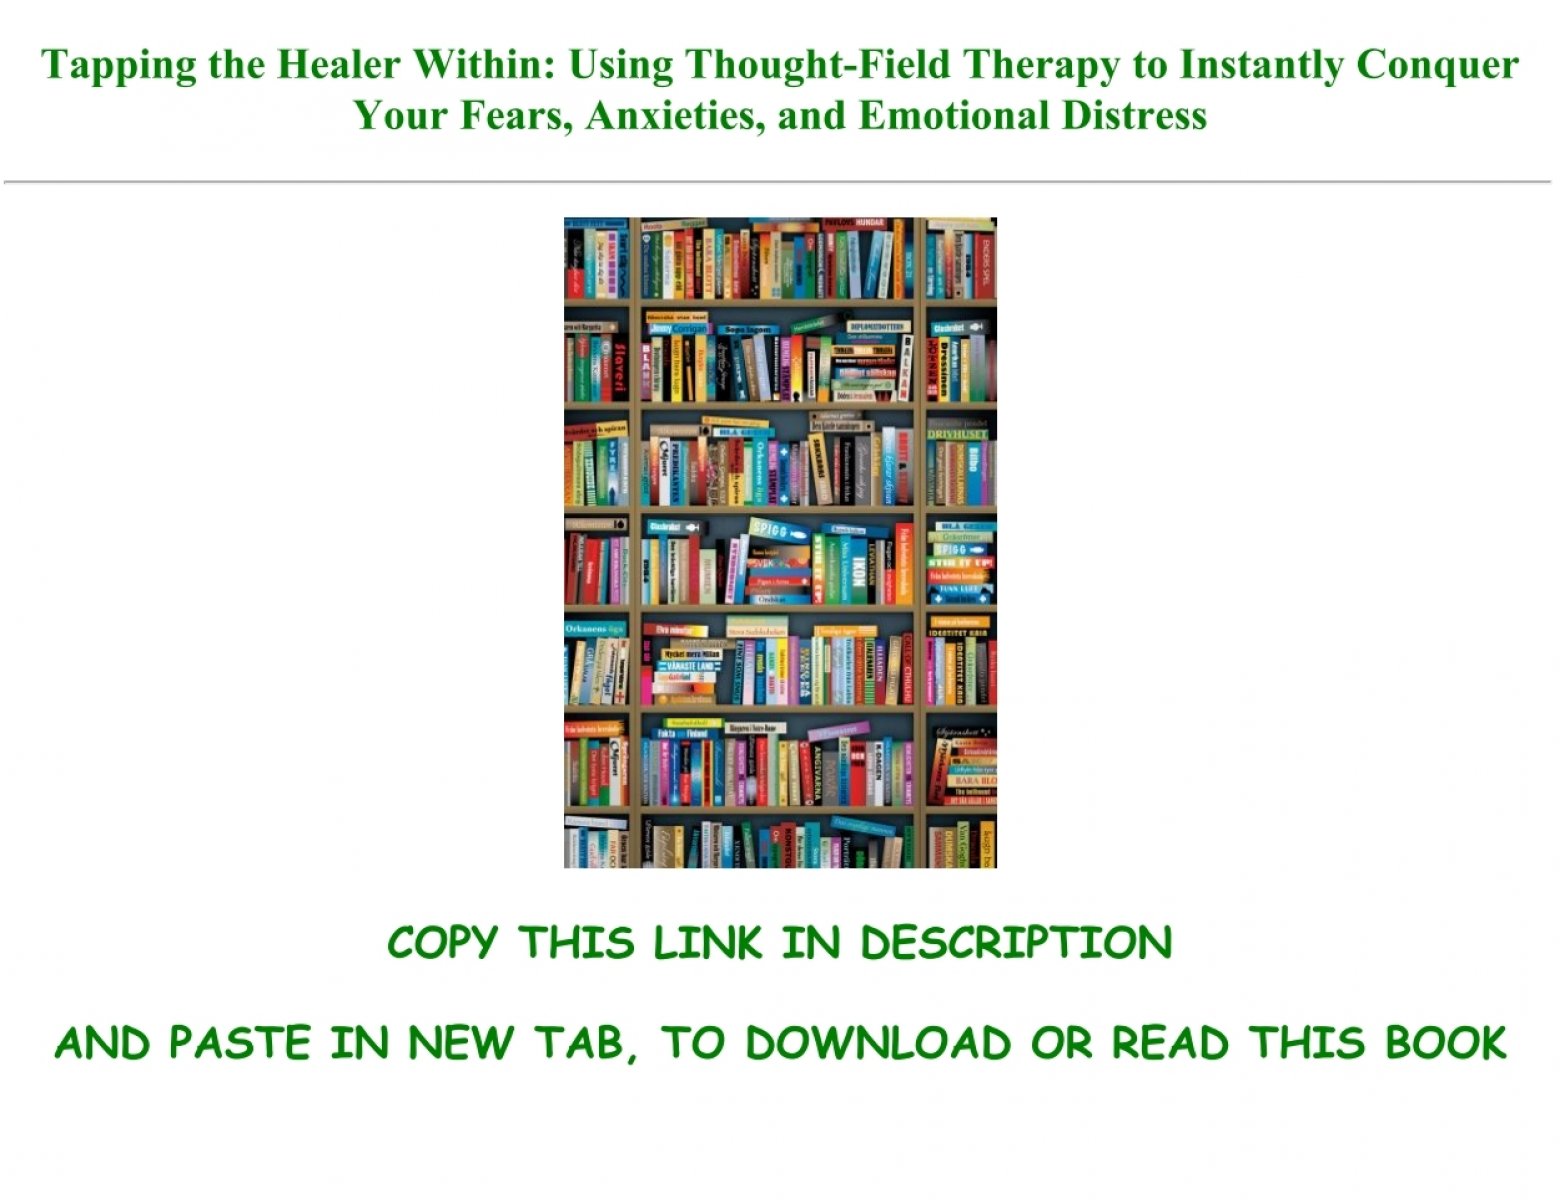 GET] PDF Tapping the Healer Within: Using Thought-Field Therapy to  Instantly Conquer Your Fears, Anxieties, and Emotional Distress Full Pages